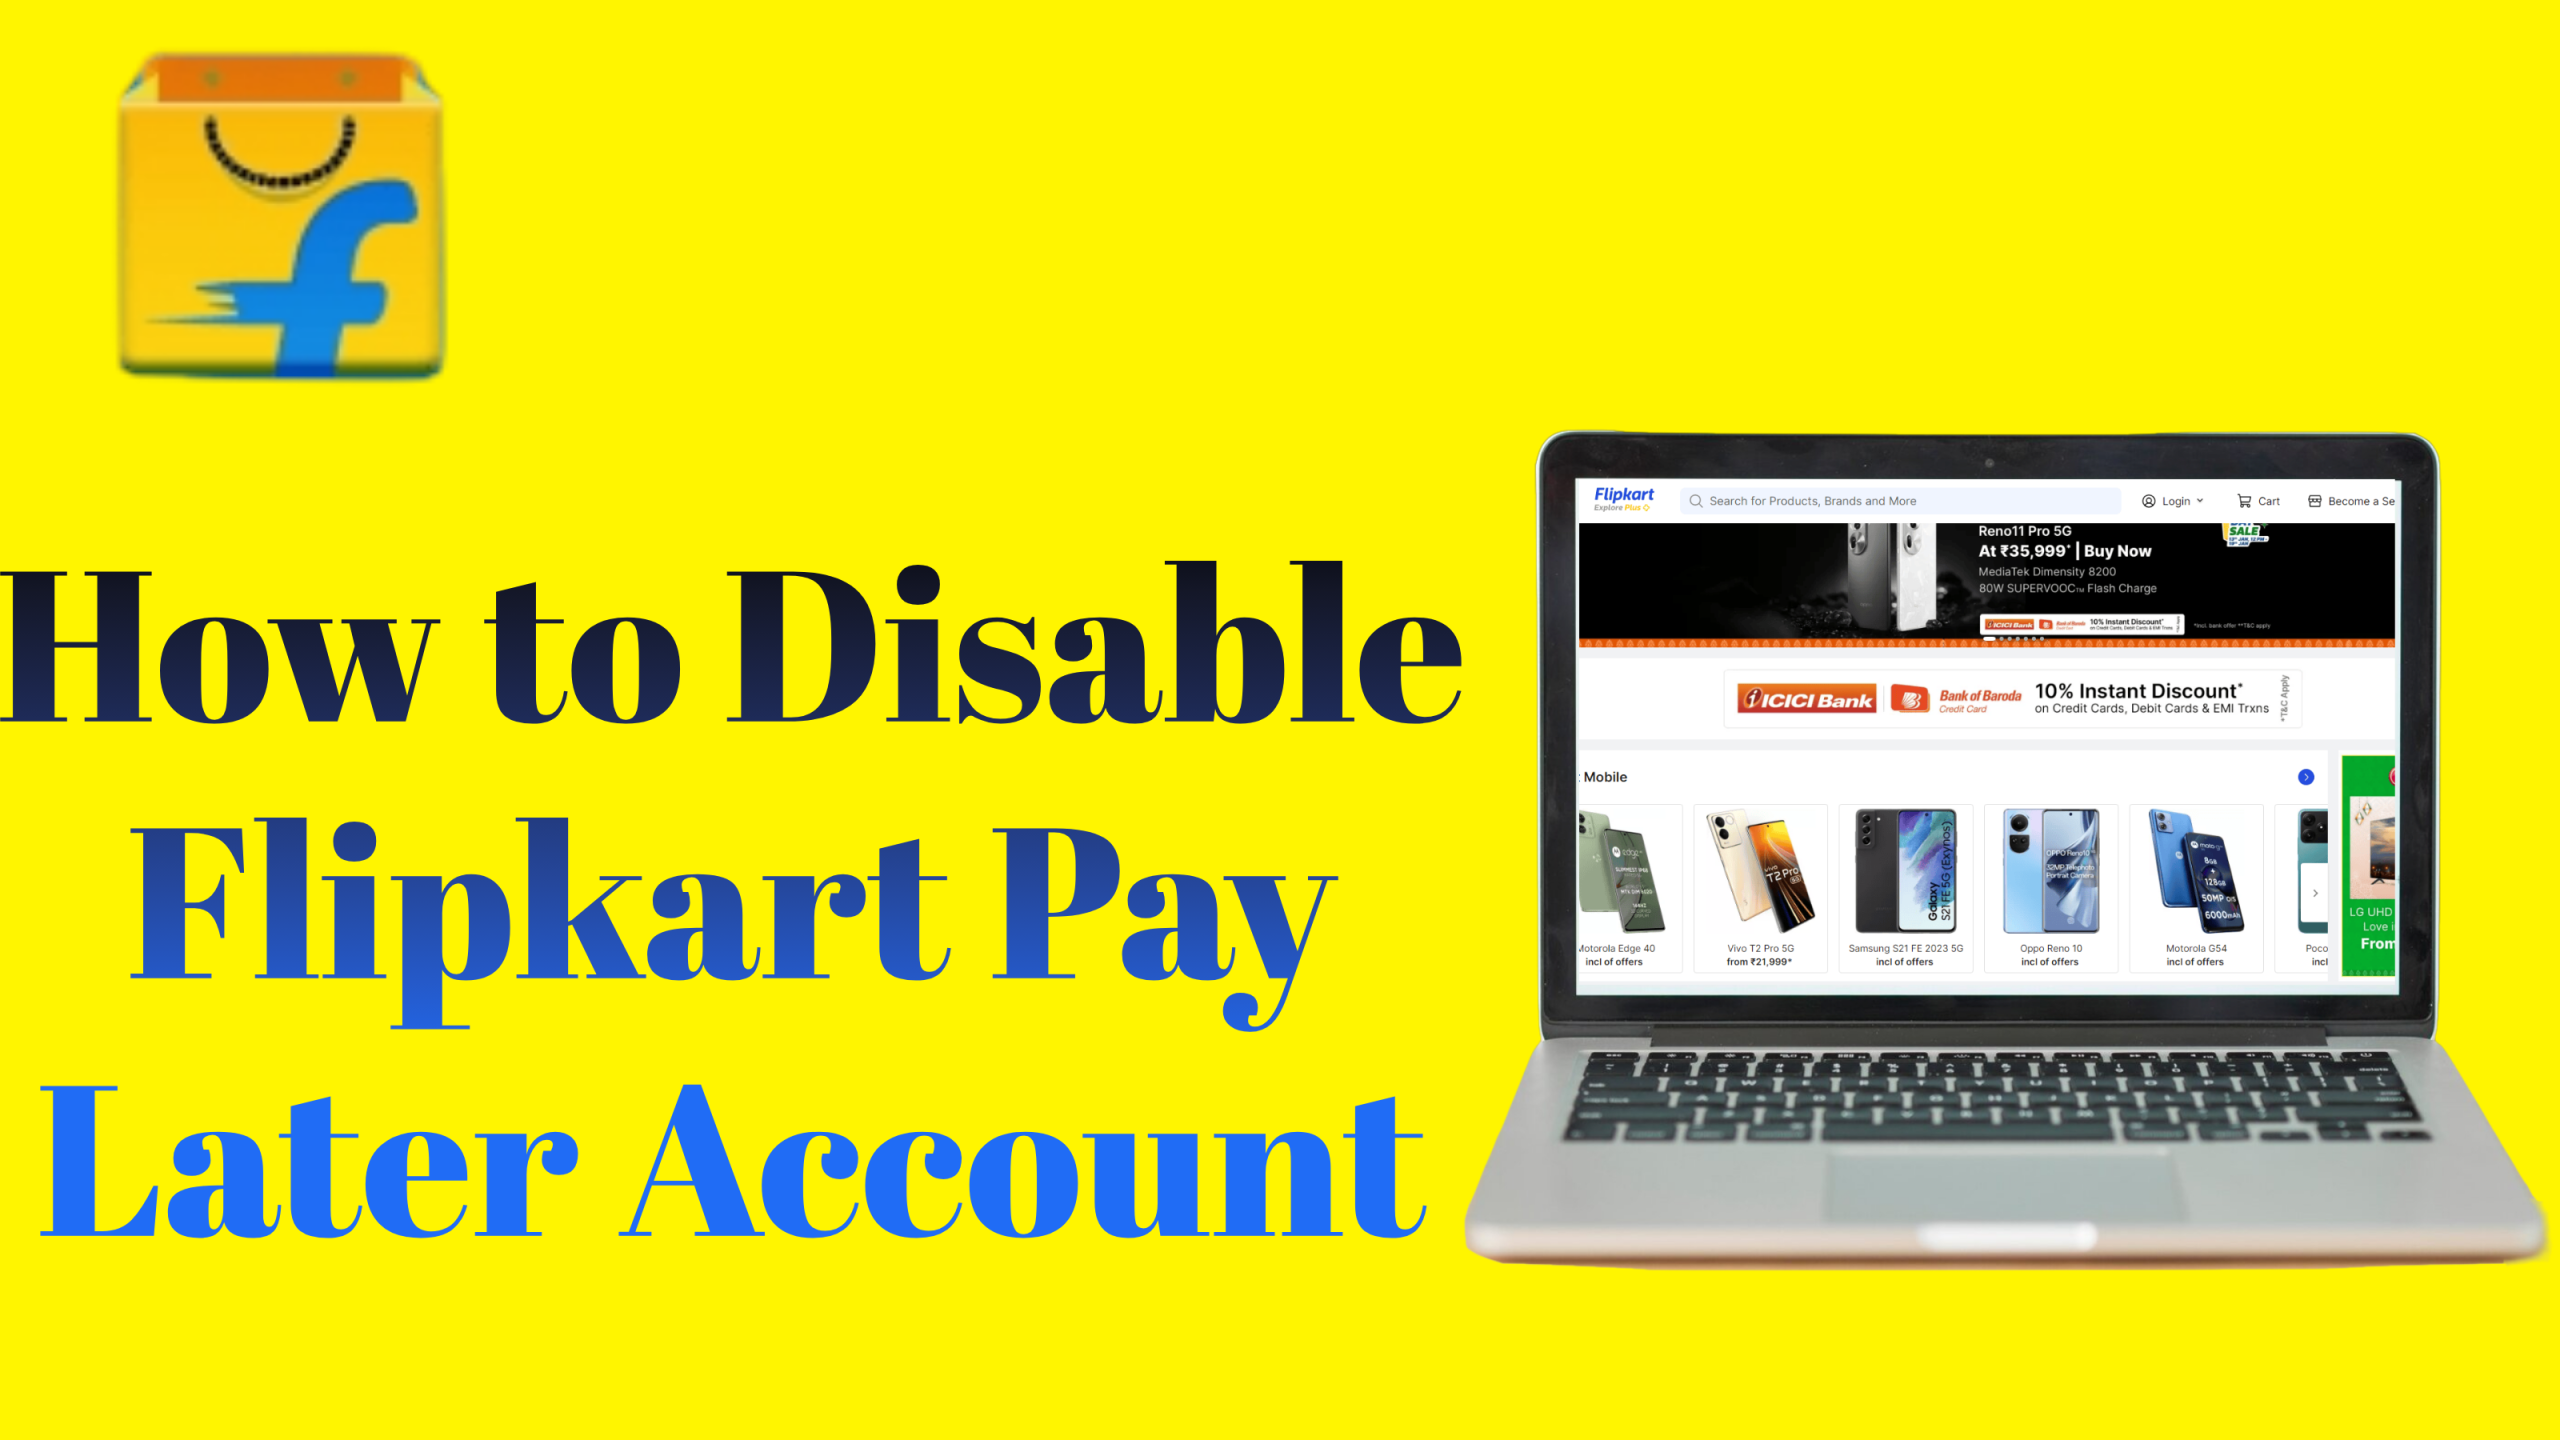 How to Disable Flipkart Pay Later Account